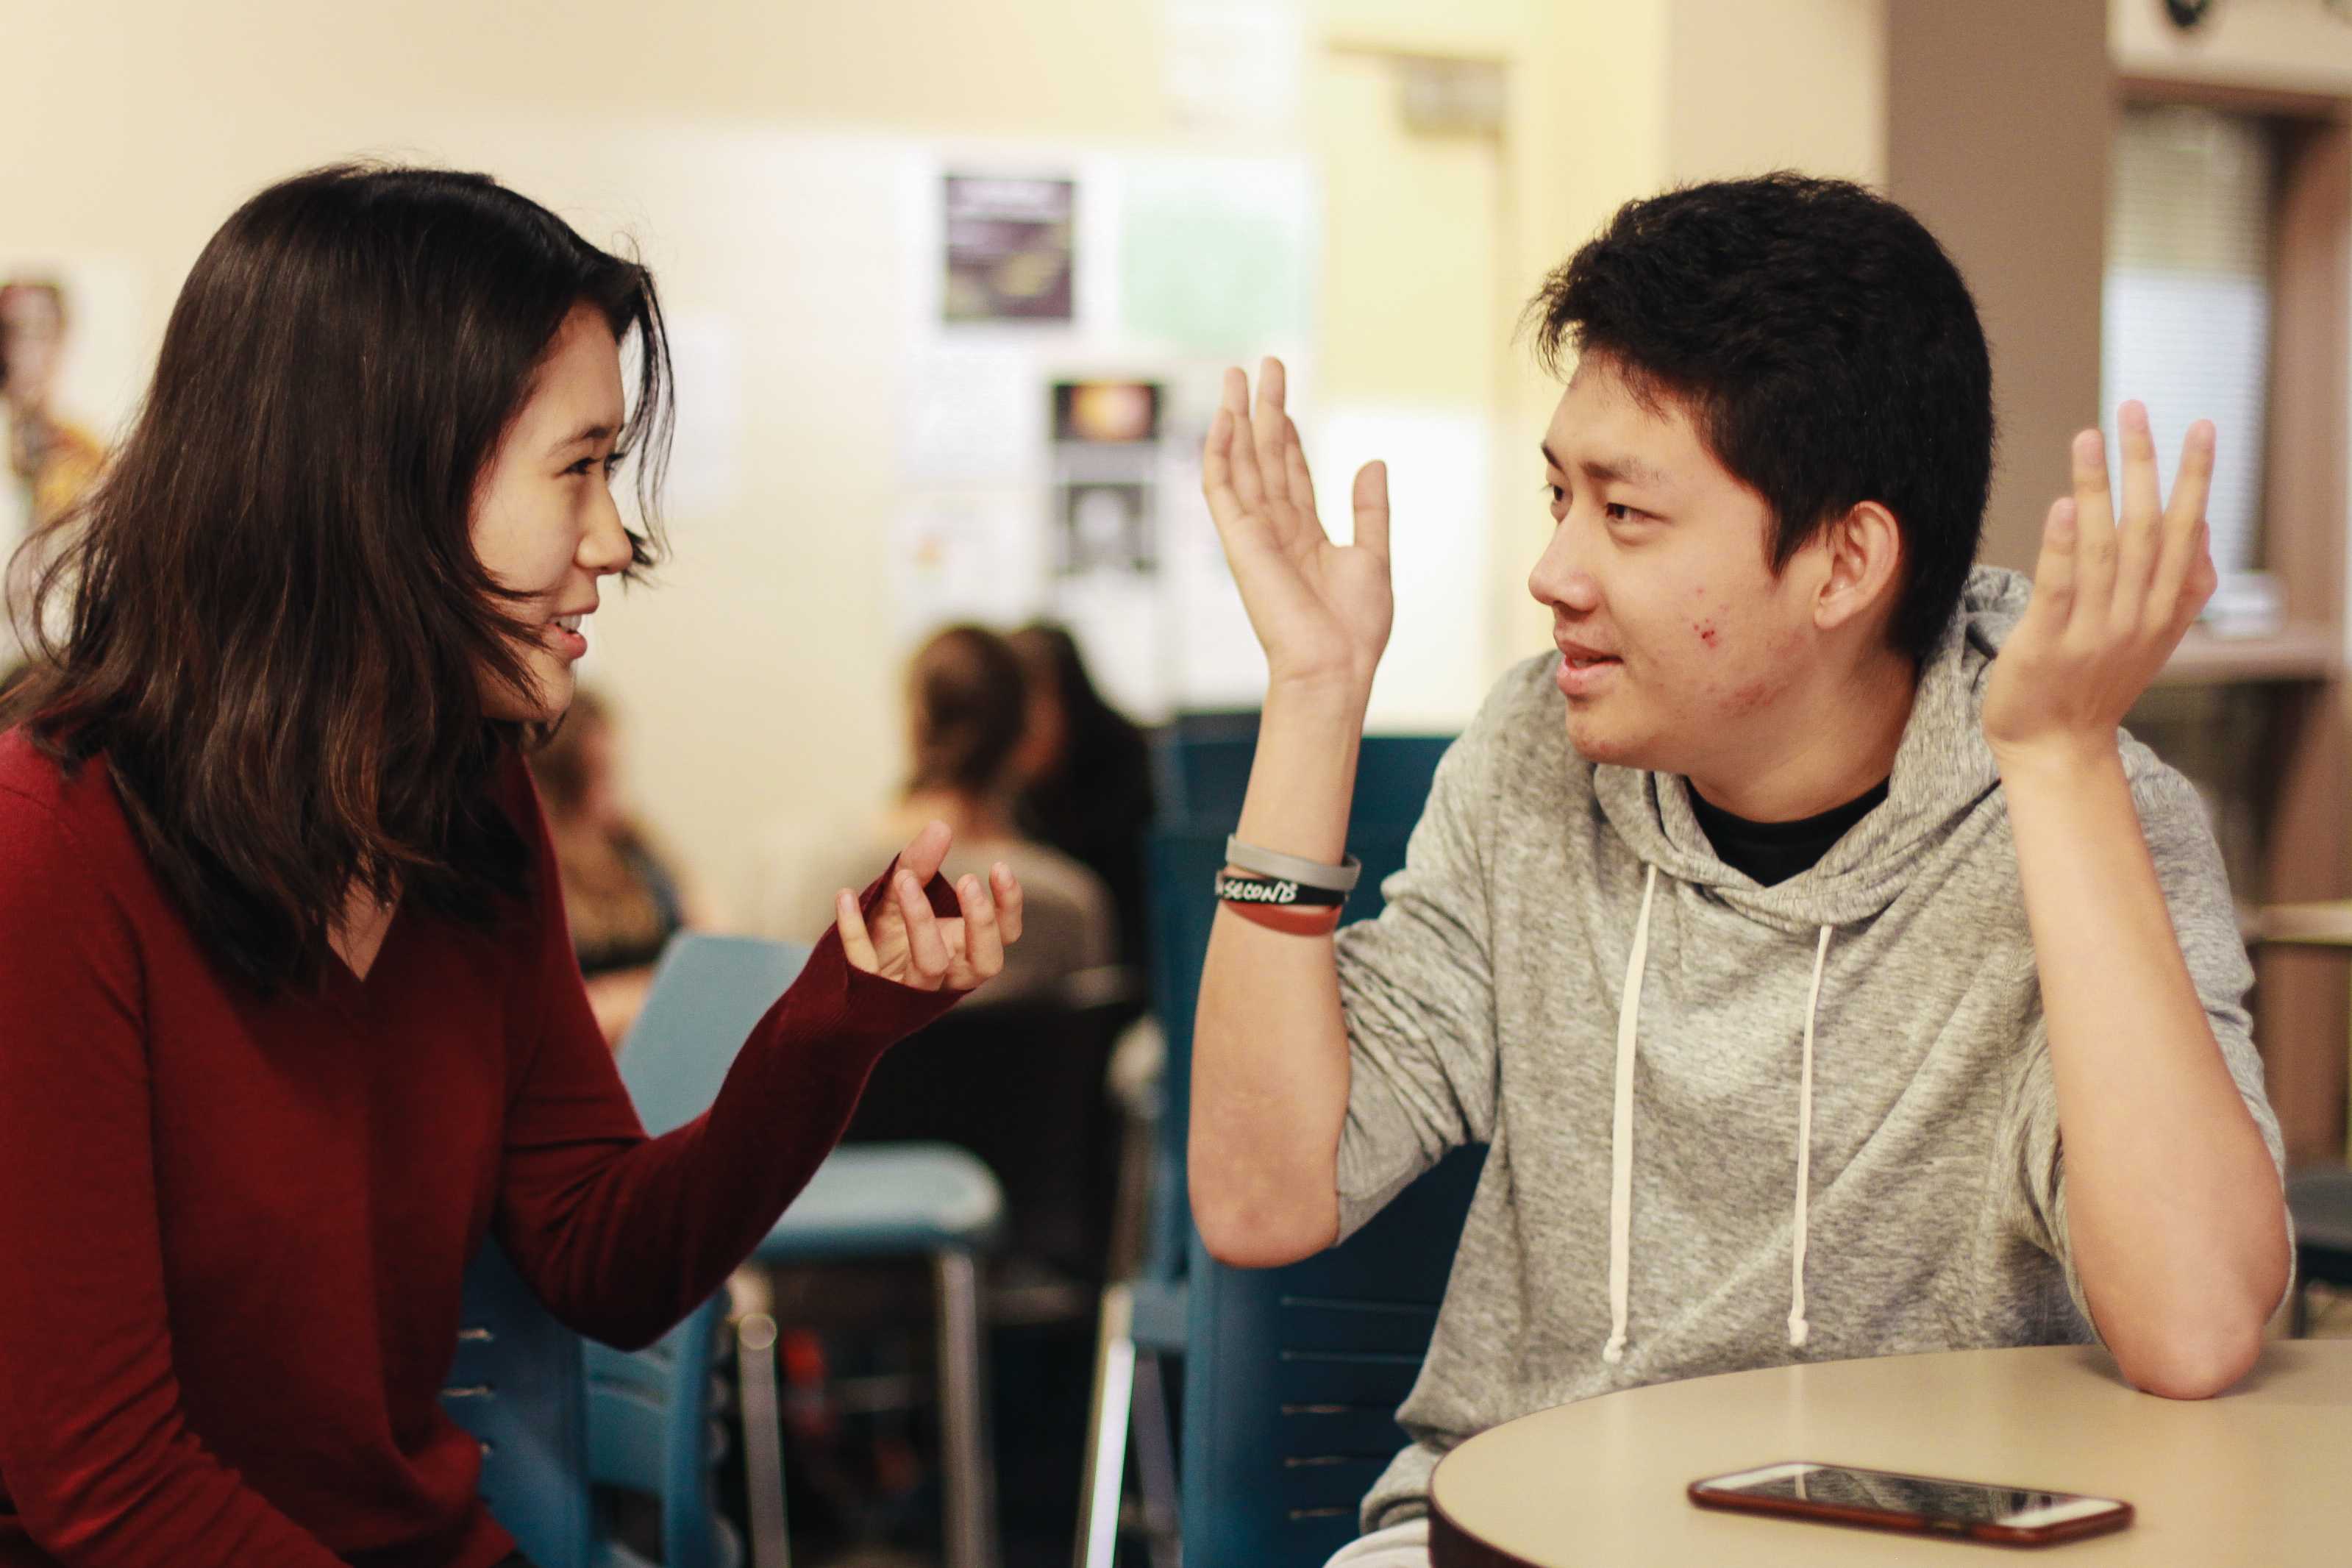 Seniors Frances Zhuang (left) and Barry He (right) discuss their upcoming debate tournaments. Both have debated on the National Circuit since 2015. "After you compete for so long, debate becomes part of you," Zhuang said. "I have difficulties separating myself from debate."